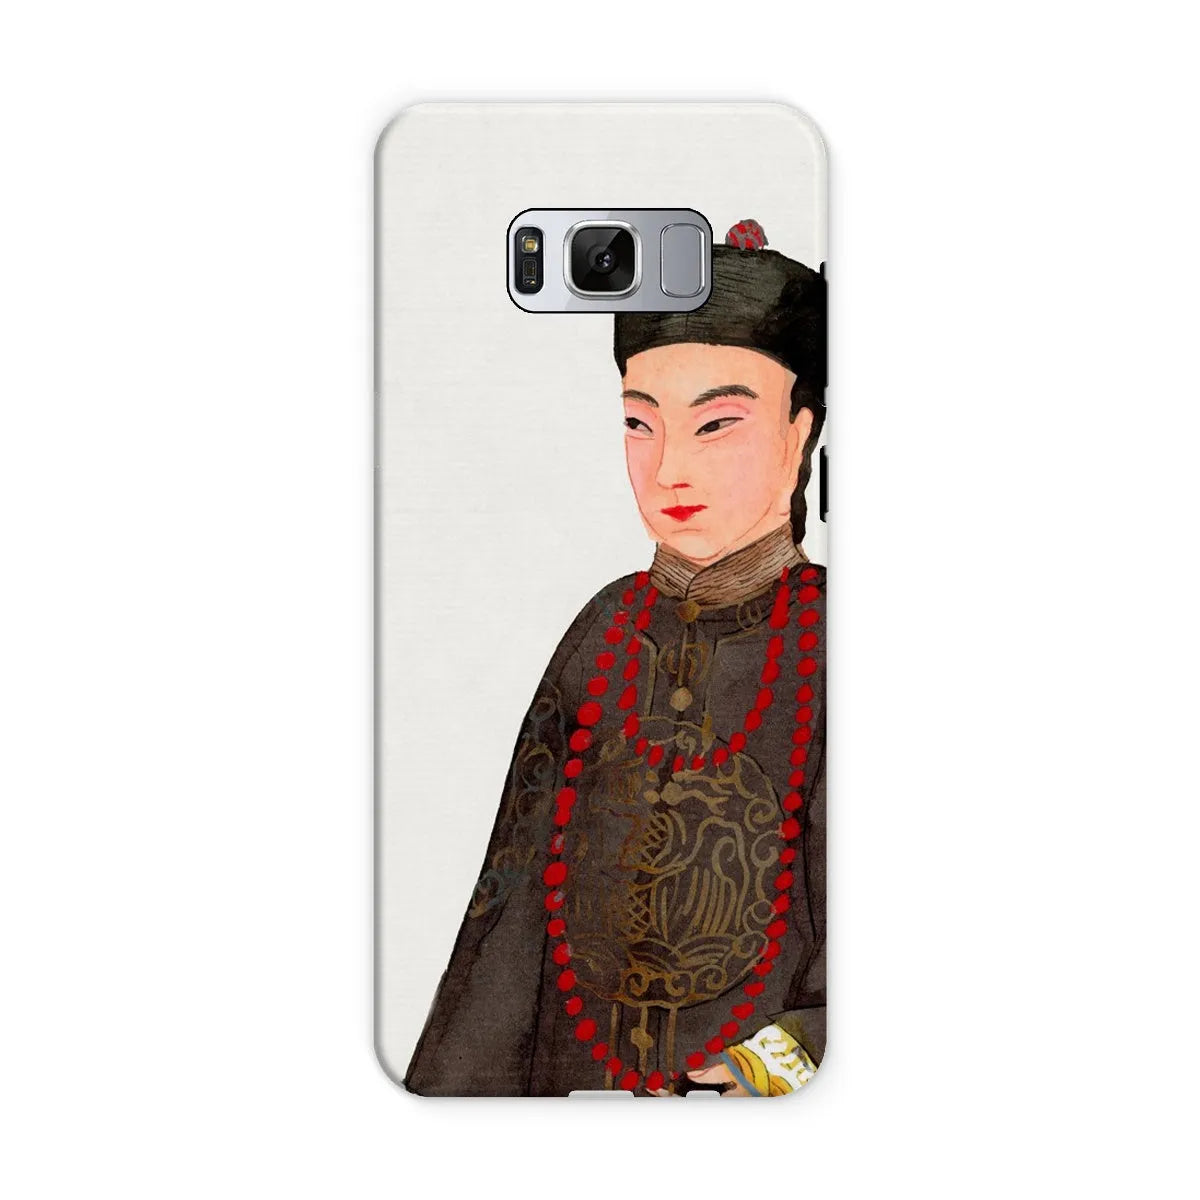 Emperor’s Courtier - Chinese Manchu Aesthetic Art Phone Case - Samsung Galaxy S8 / Matte - Mobile Phone Cases